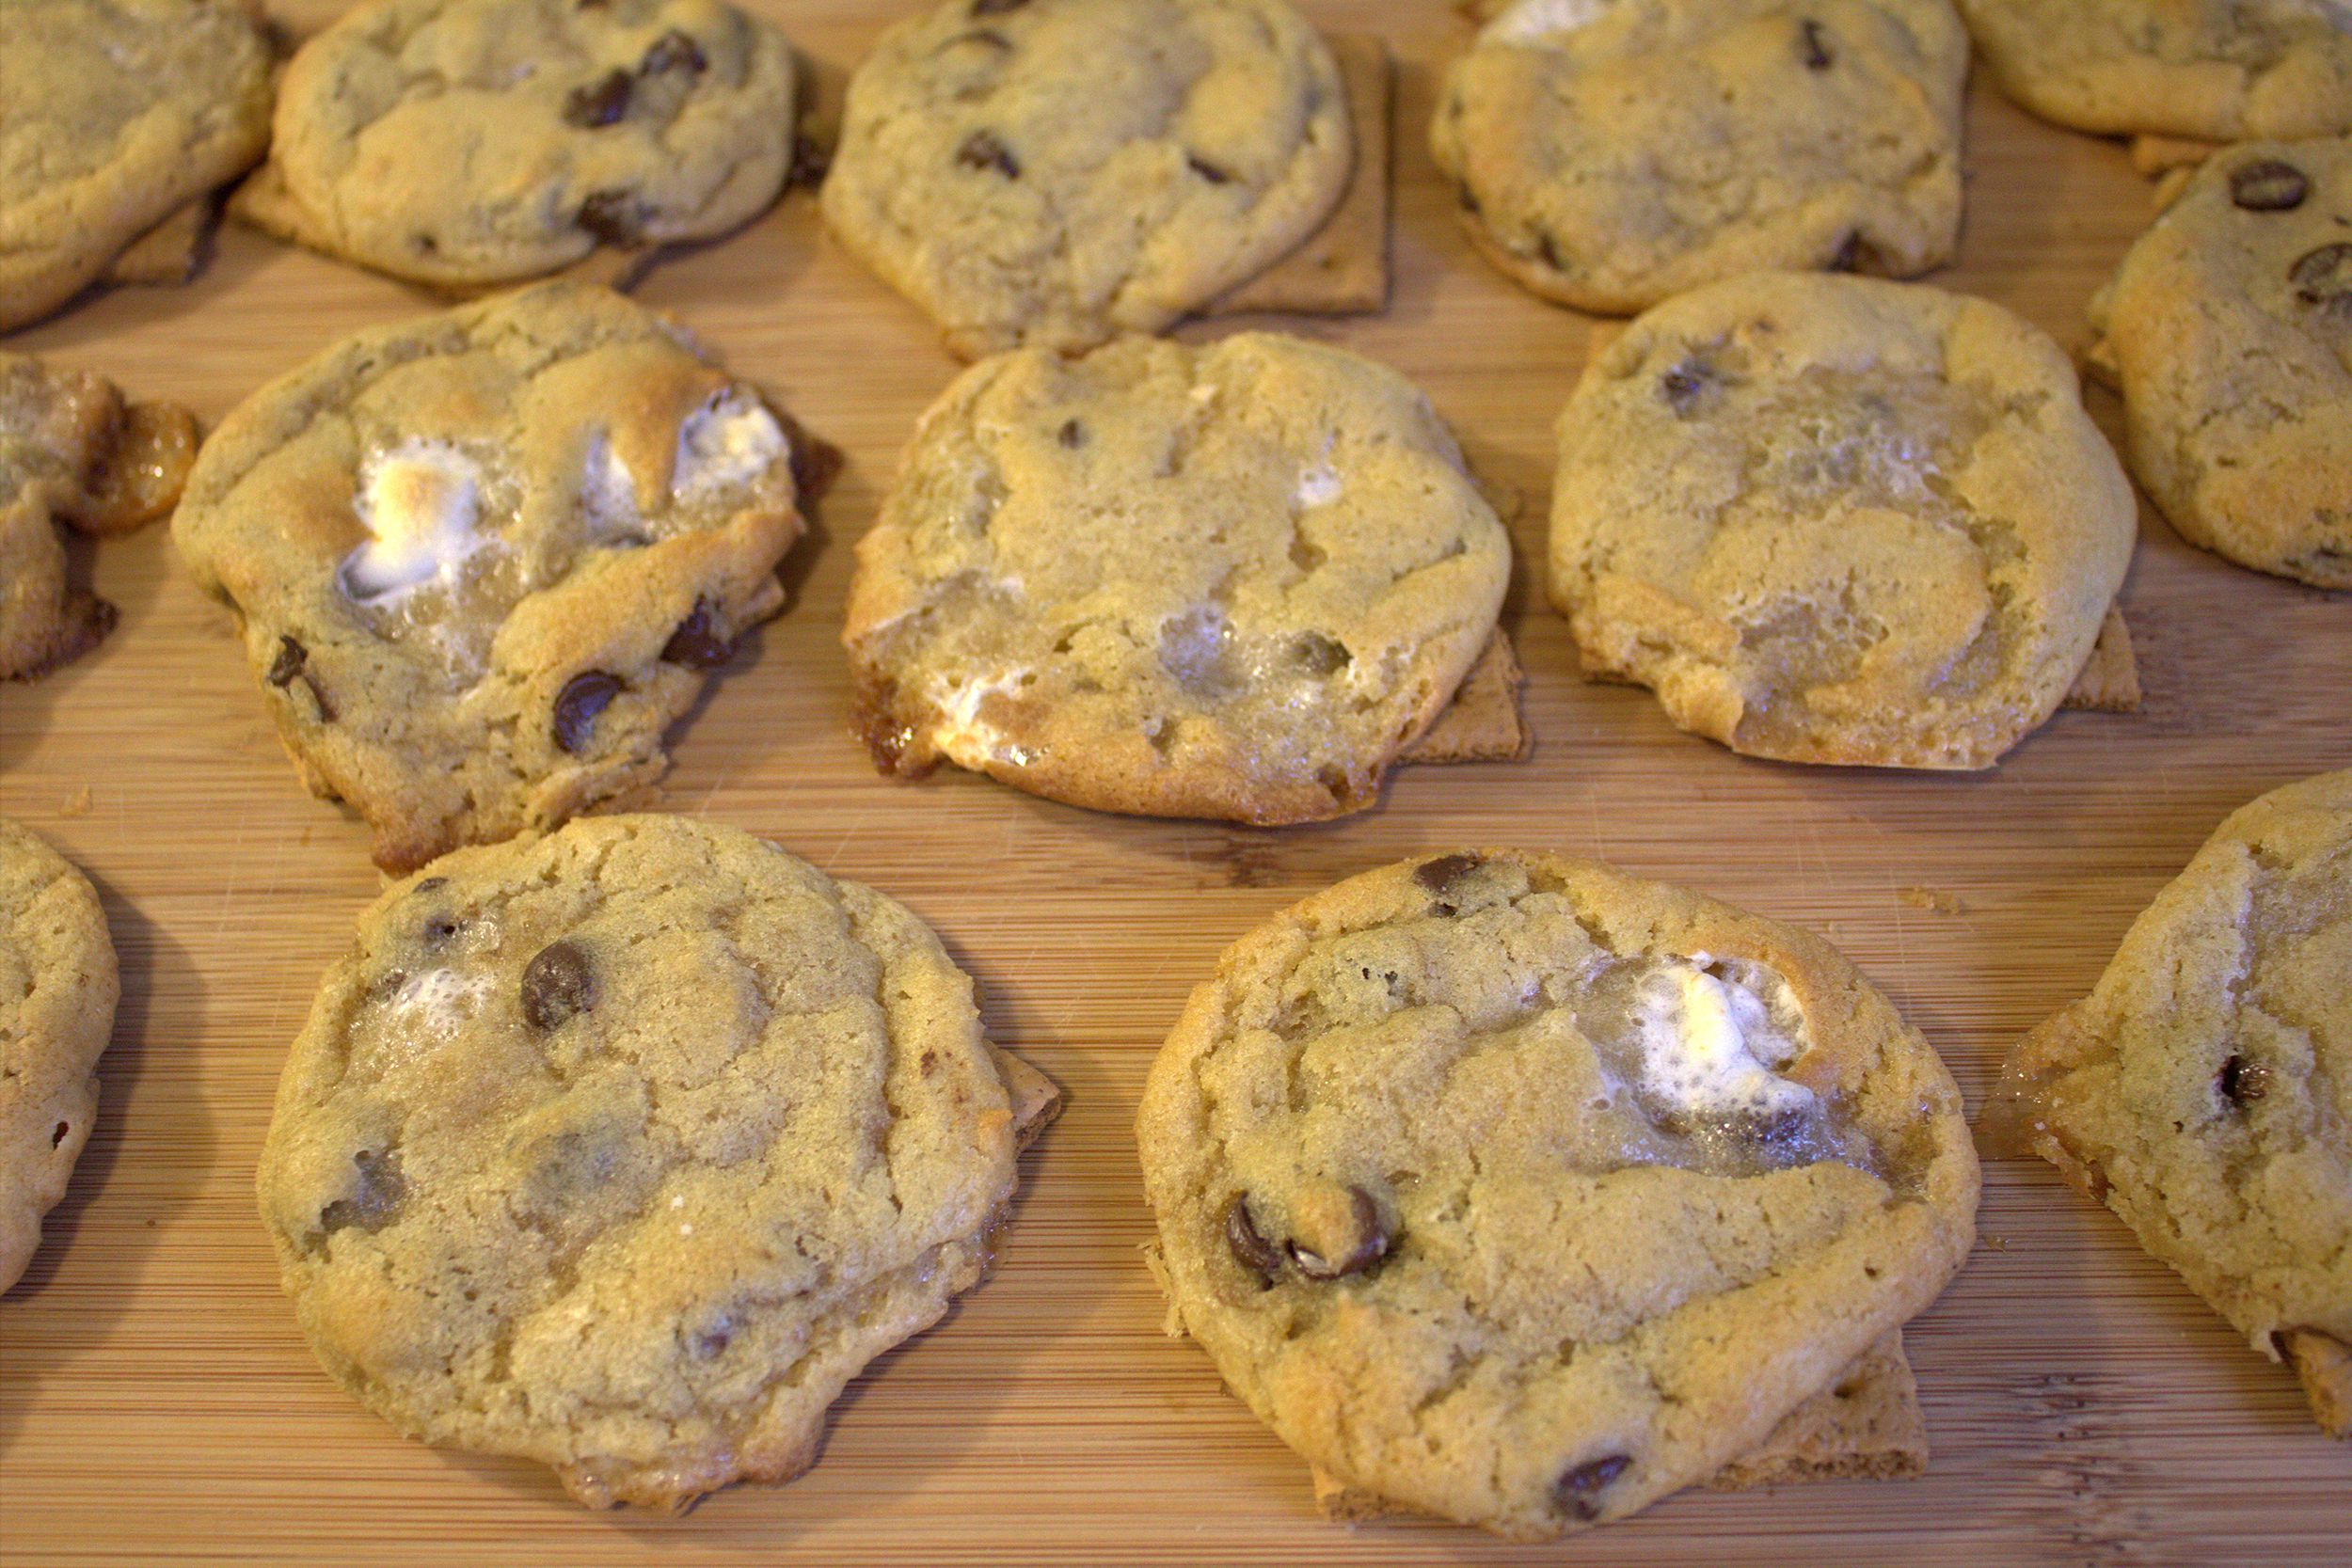 <p>These indulgent cookies are an ooey, gooey twist on two family favorites. Incorporating <a href="https://blog.cheapism.com/creative-smores-recipes-14179/">toasted marshmallow s'mores</a> into soft cookies is surprisingly simple and especially fitting for summer, the season for cooking s'mores over a campfire. When there's no camping trip on the calendar, a batch of s'mores cookies can be ready in less than three hours.</p><p><b>Recipe:</b> <a href="https://sallysbakingaddiction.com/toasted-smore-chocolate-chip-cookies/">Sally's Baking Addiction</a></p> <p><b>For more great recipes and kitchen tips,</b> <a href="https://cheapism.us14.list-manage.com/subscribe?u=de966e79b38e1d833d5781074&id=c14db36dd0">please sign up for our free newsletters</a>.</p>